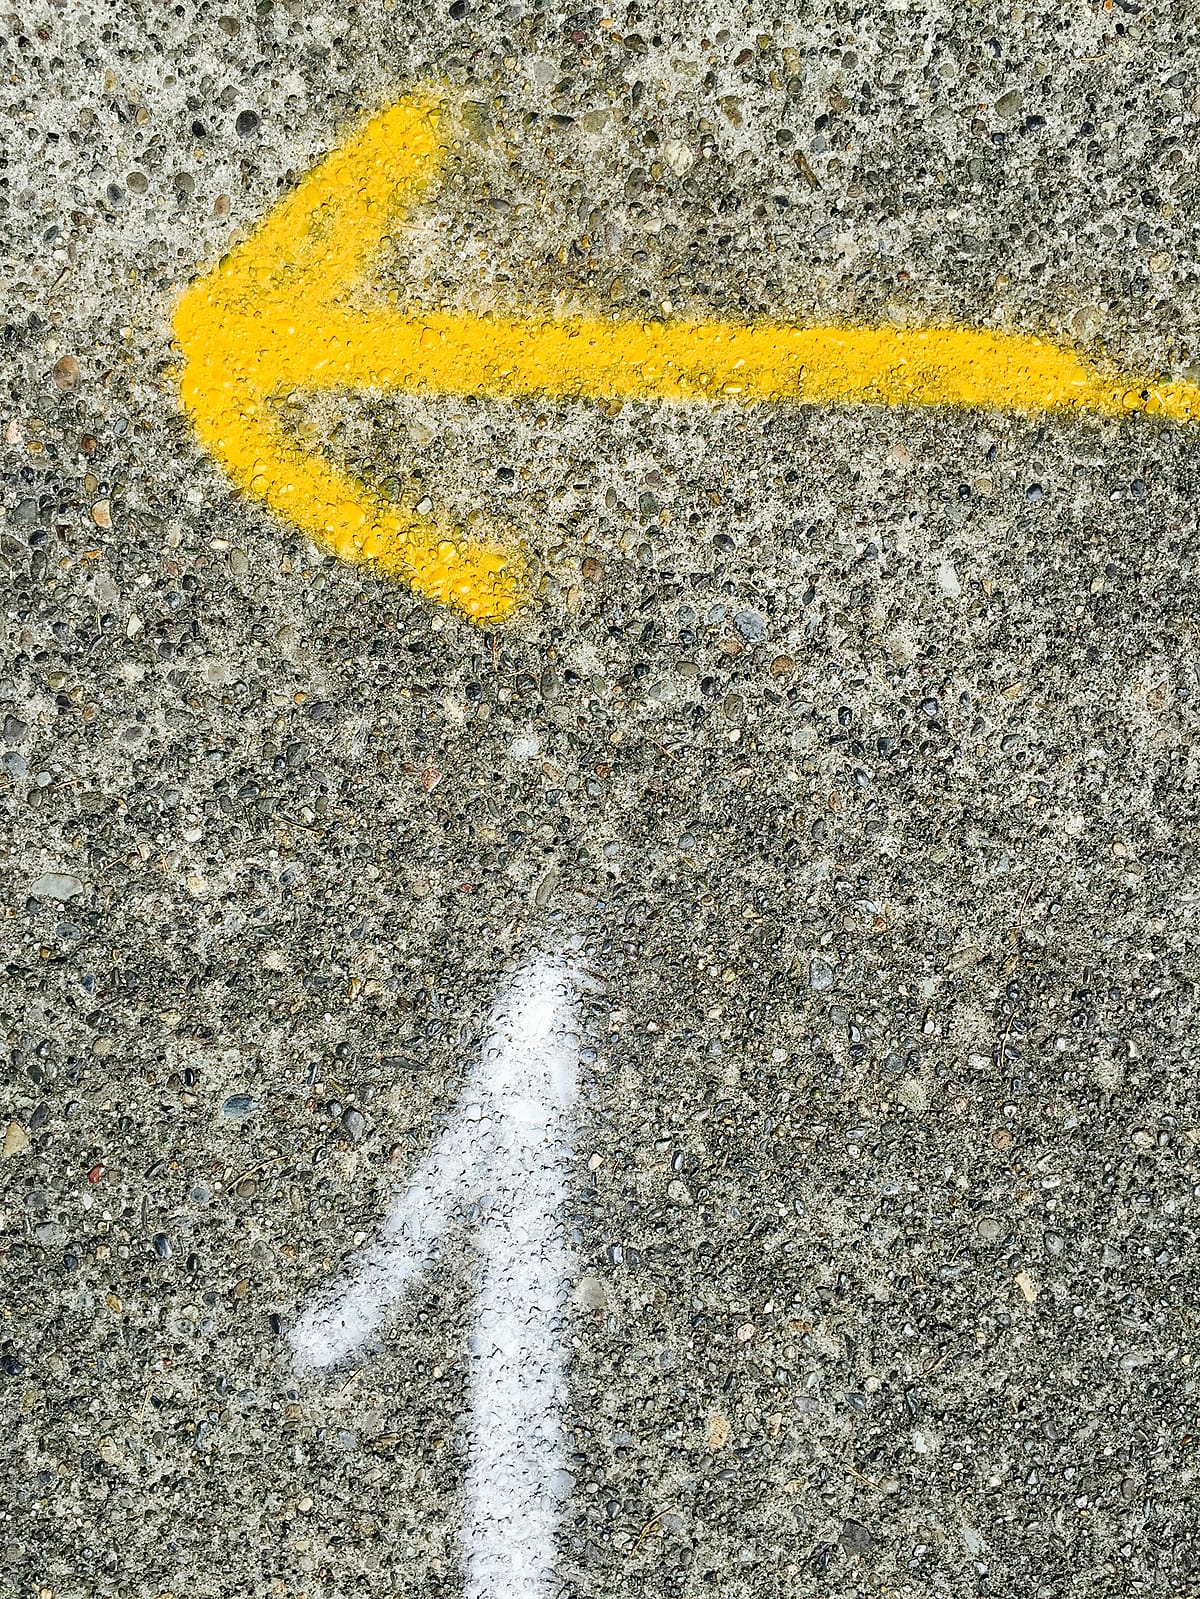 Yellow and white arrows